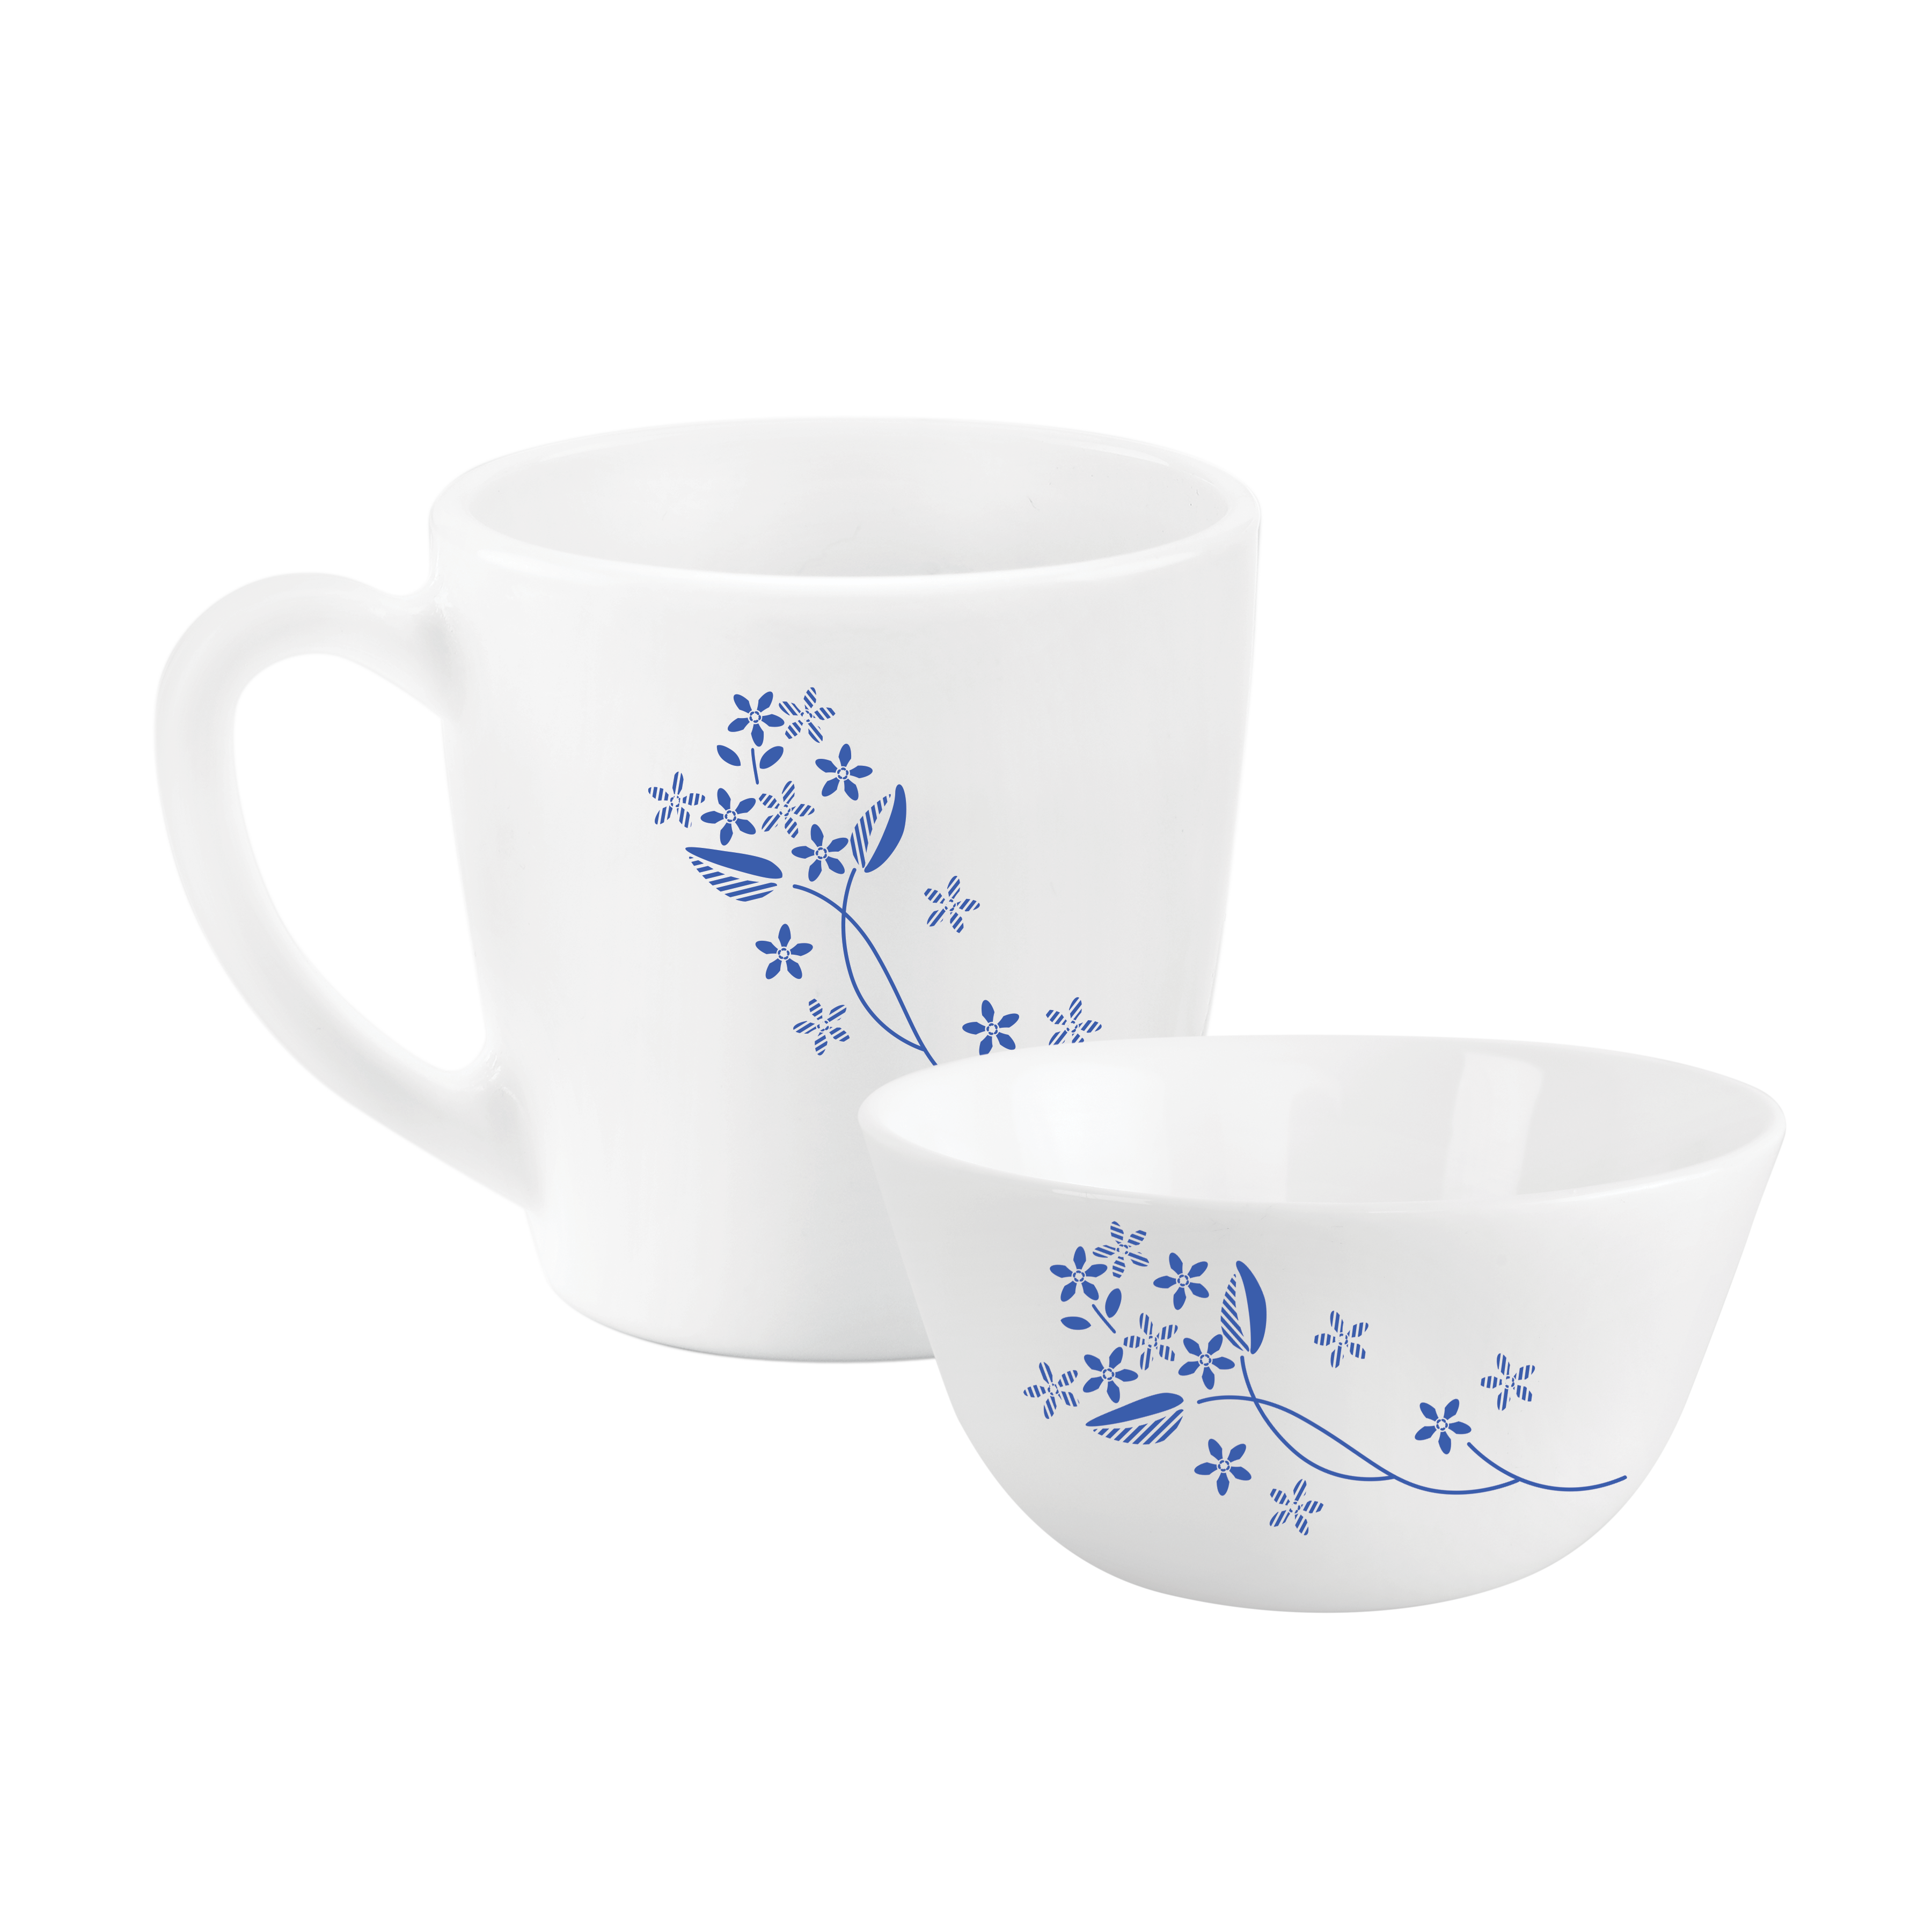 Imperial Series Breakfast Bowl & Mug Gift set, 4 Pieces Dainty Blue / 4 Pieces